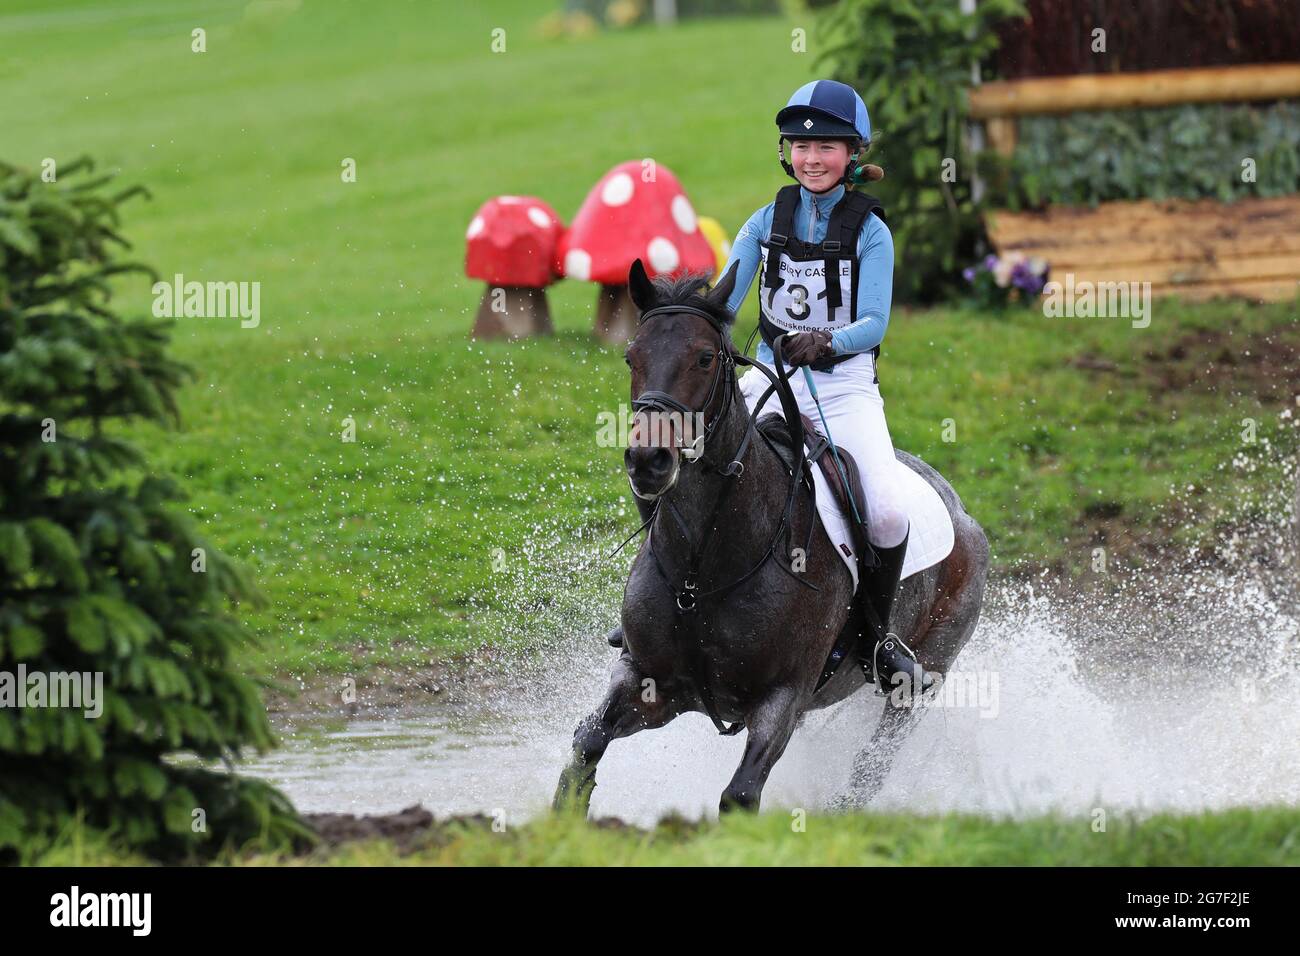 MARLBOROUGH, UK. JULY 10TH. Alexandra Horne riding Burley Morse during PT Section M Cross Country event at the Barbury Castle International Horse Trials, Marlborough, Wiltshire, UK on Saturday 10th July 2021. (Credit: Jon Bromley | MI News) Stock Photo